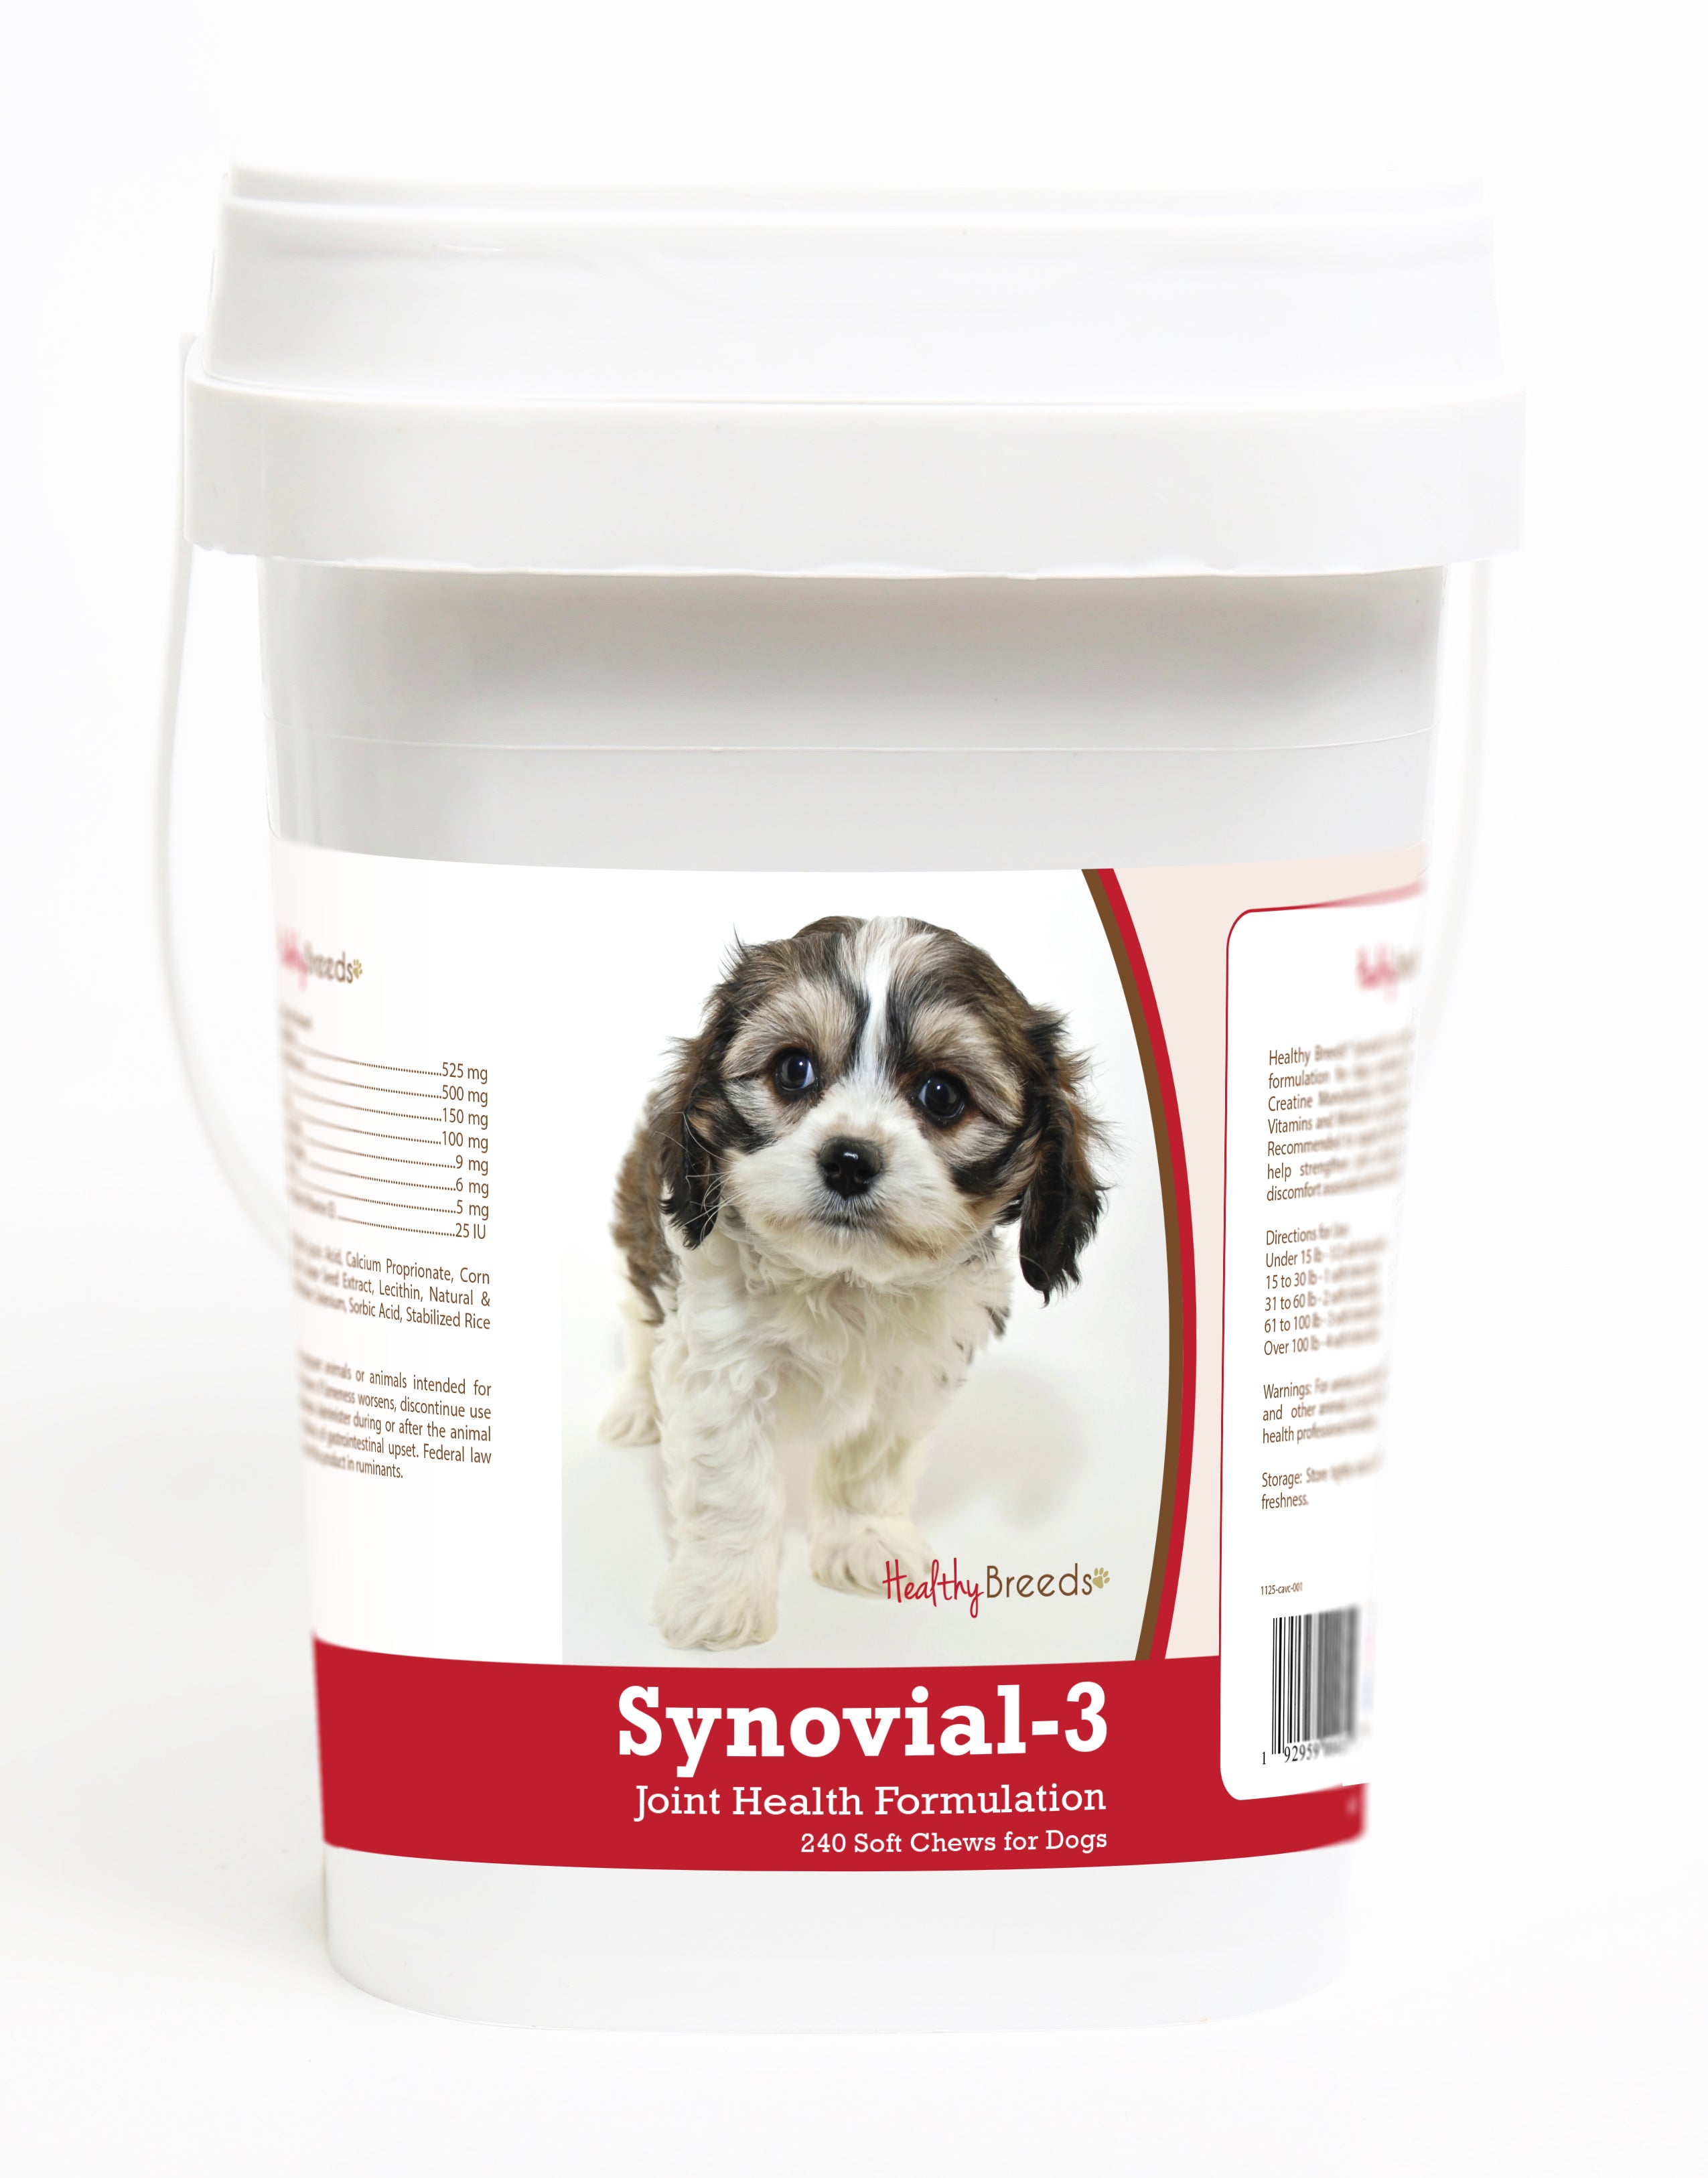 Cavachon Synovial-3 Joint Health Formulation Soft Chews 240 Count